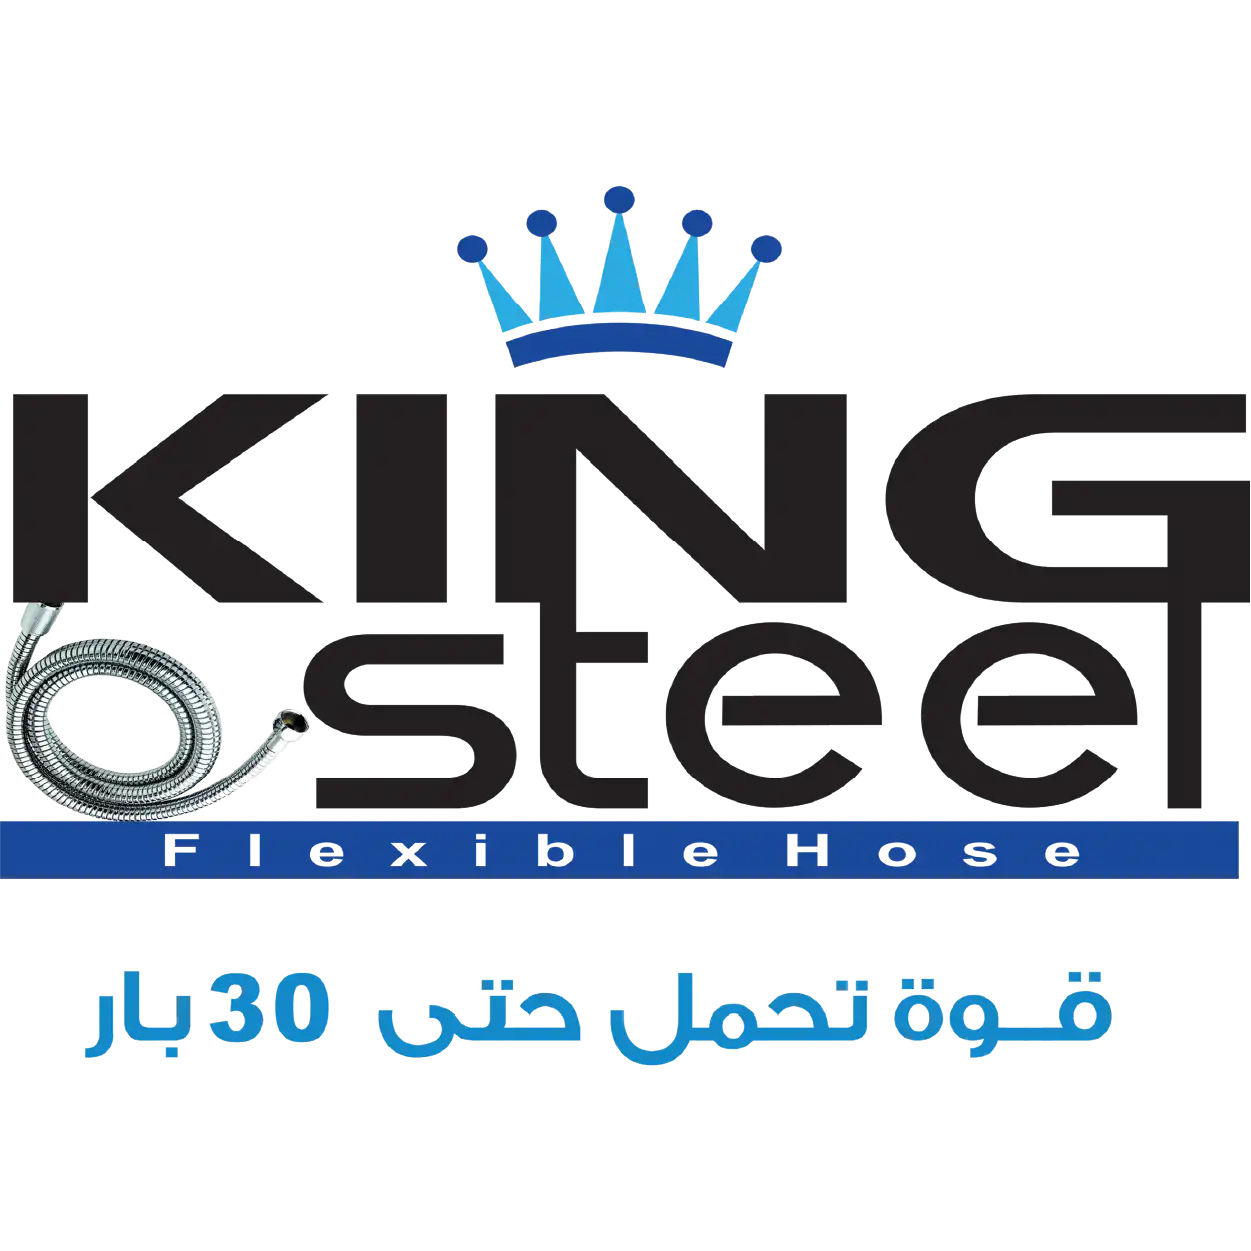 20 - Booth 228 King Steel - Egypt.psd